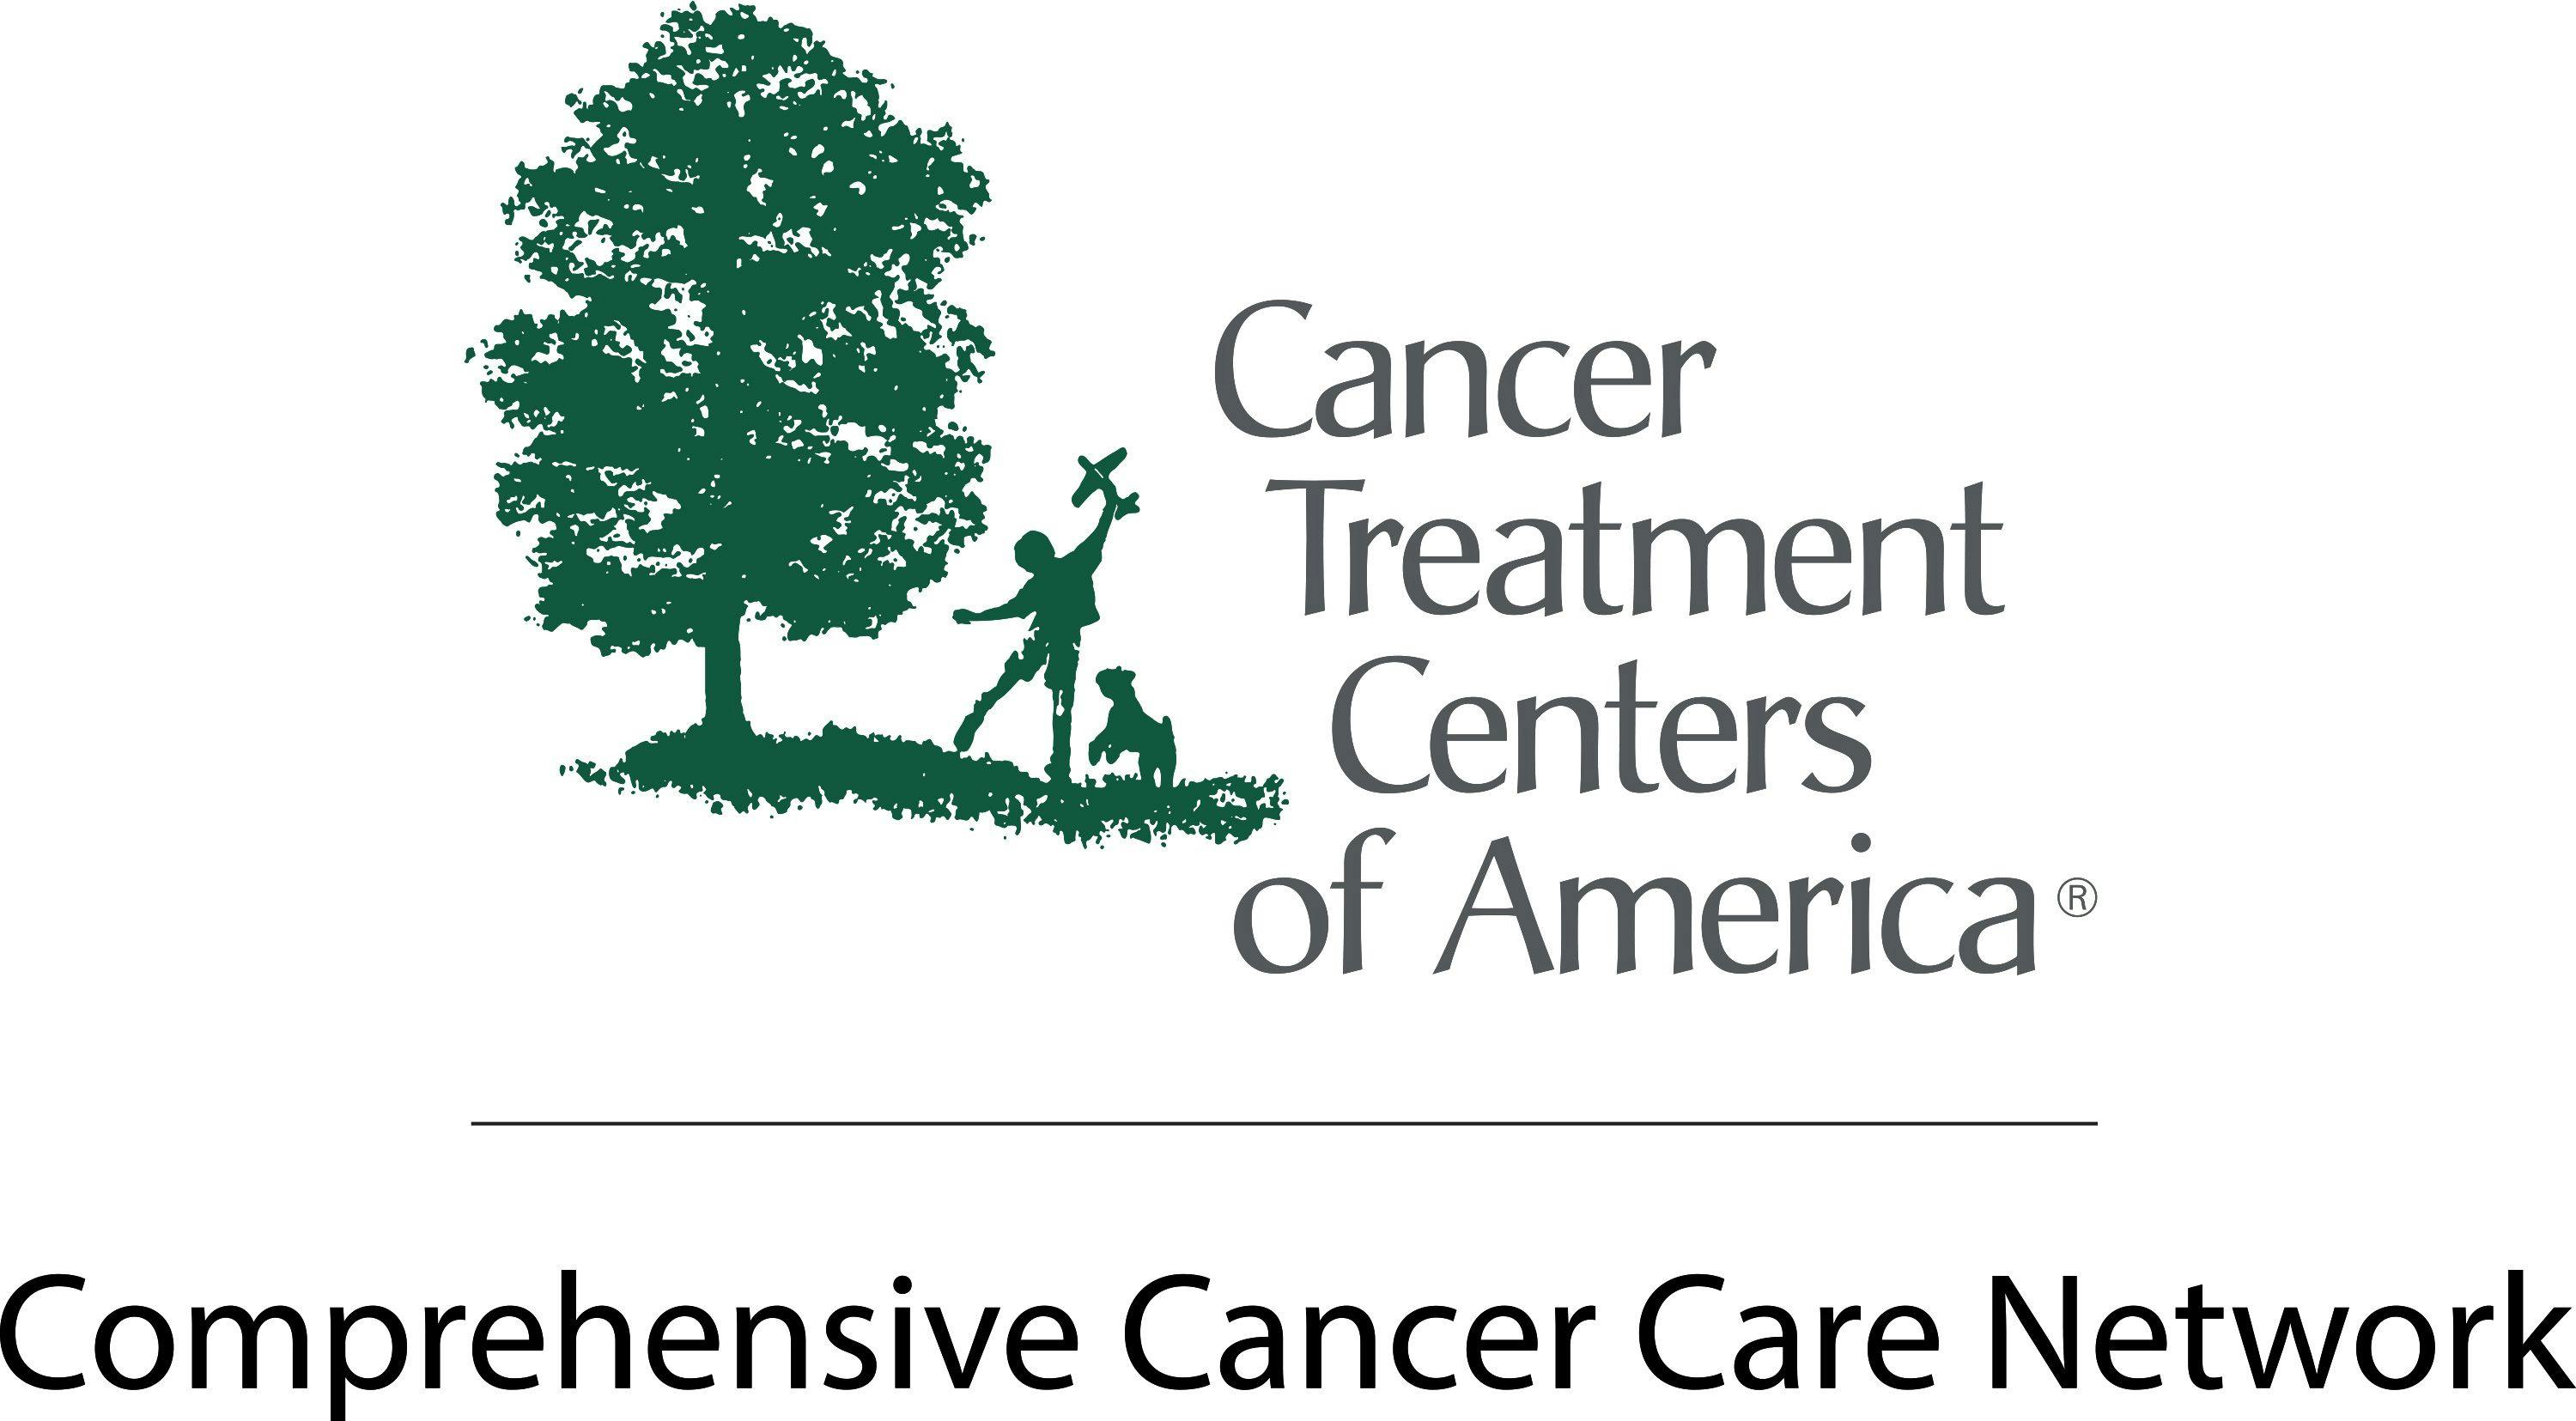 City of Hope to Rebrand Cancer Treatment Centers of America Locations to Reflect Transition to National System